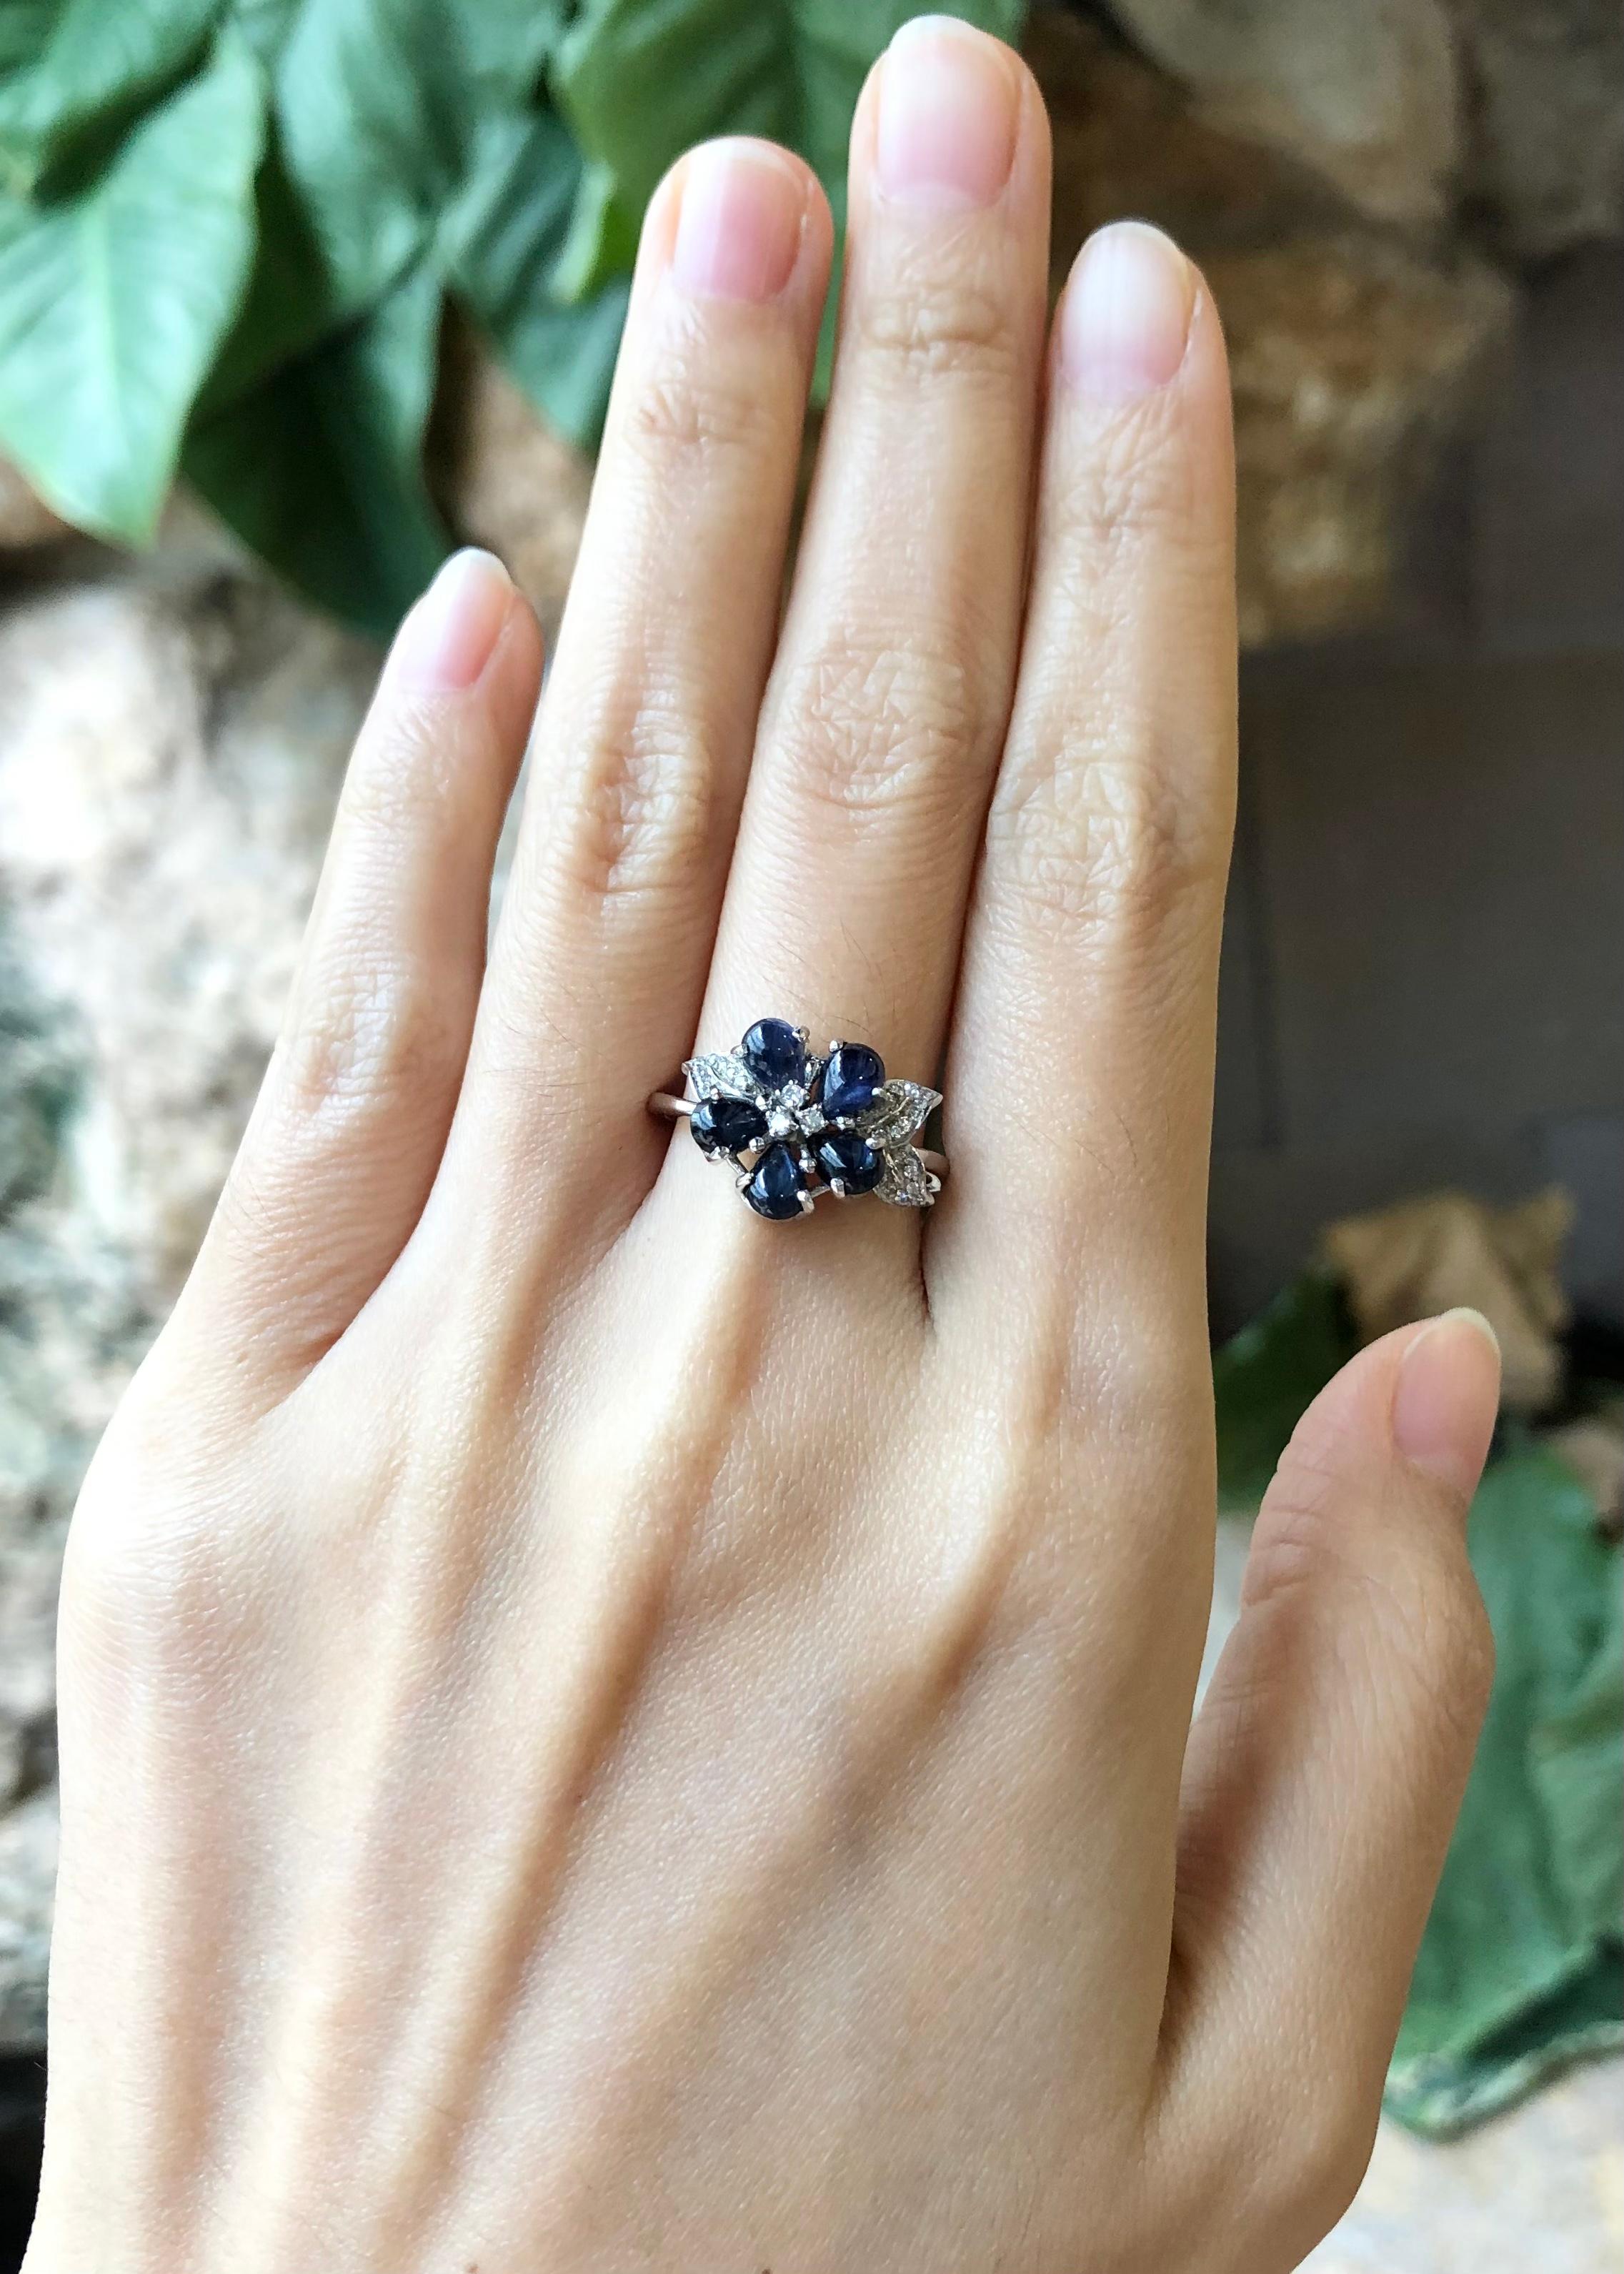 Cabochon Blue Sapphire with Cubic Zirconia Ring set in Silver Settings

Width:  1.2 cm 
Length: 1.2 cm
Ring Size: 56
Total Weight: 2.58 grams

*Please note that the silver setting is plated with rhodium to promote shine and help prevent oxidation. 